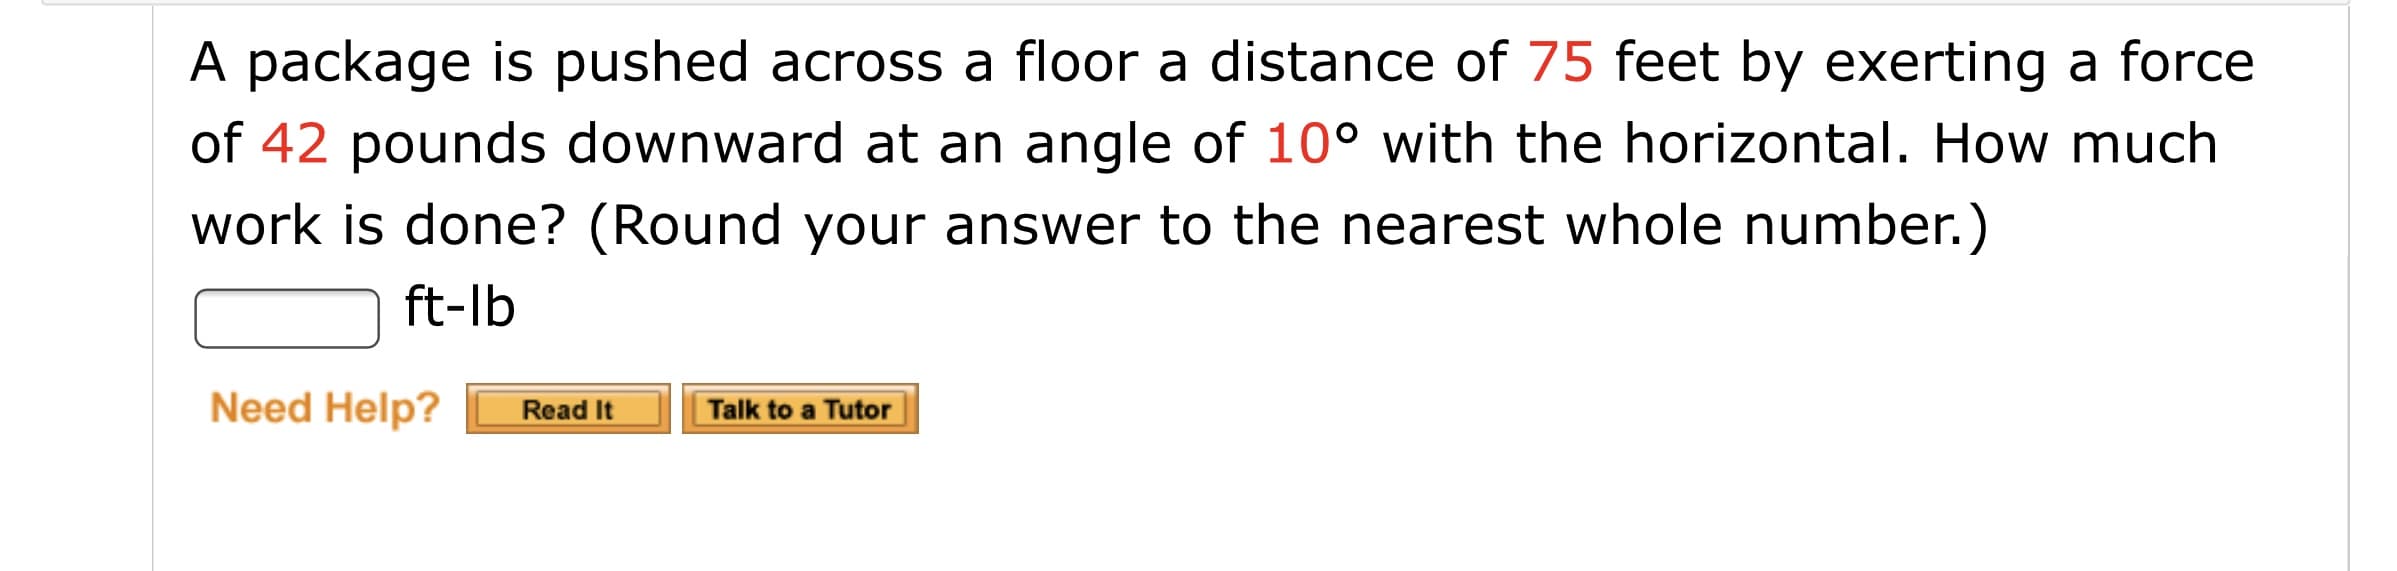 A package is pushed across a floor a distance of 75 feet by exerting a force
of 42 pounds downward at an angle of 10° with the horizontal. How much
work is done? (Round your answer to the nearest whole number.)
ft-lb
